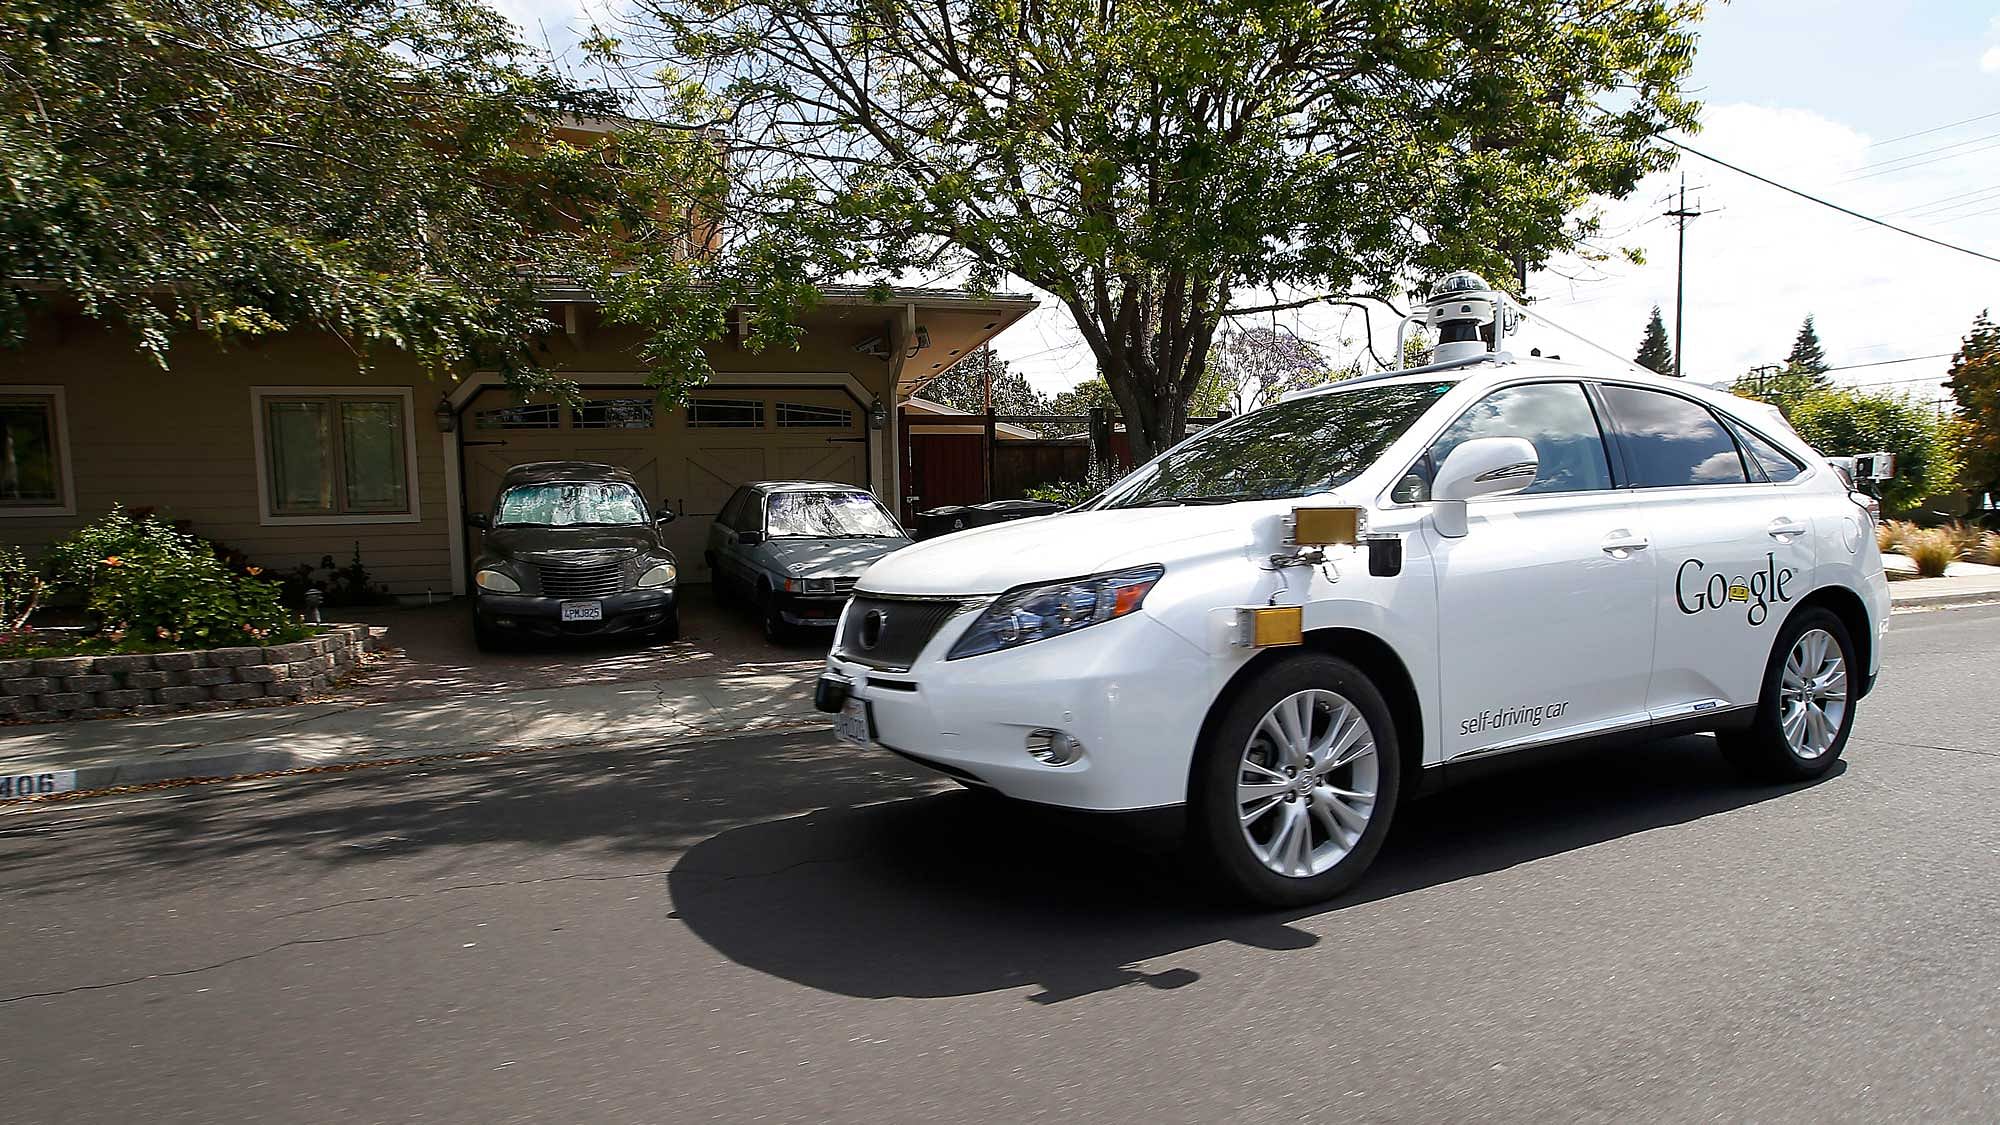 Google’s self-driving Lexus during a demonstration at the Google campus in Mountain View, California. (Photo: AP)